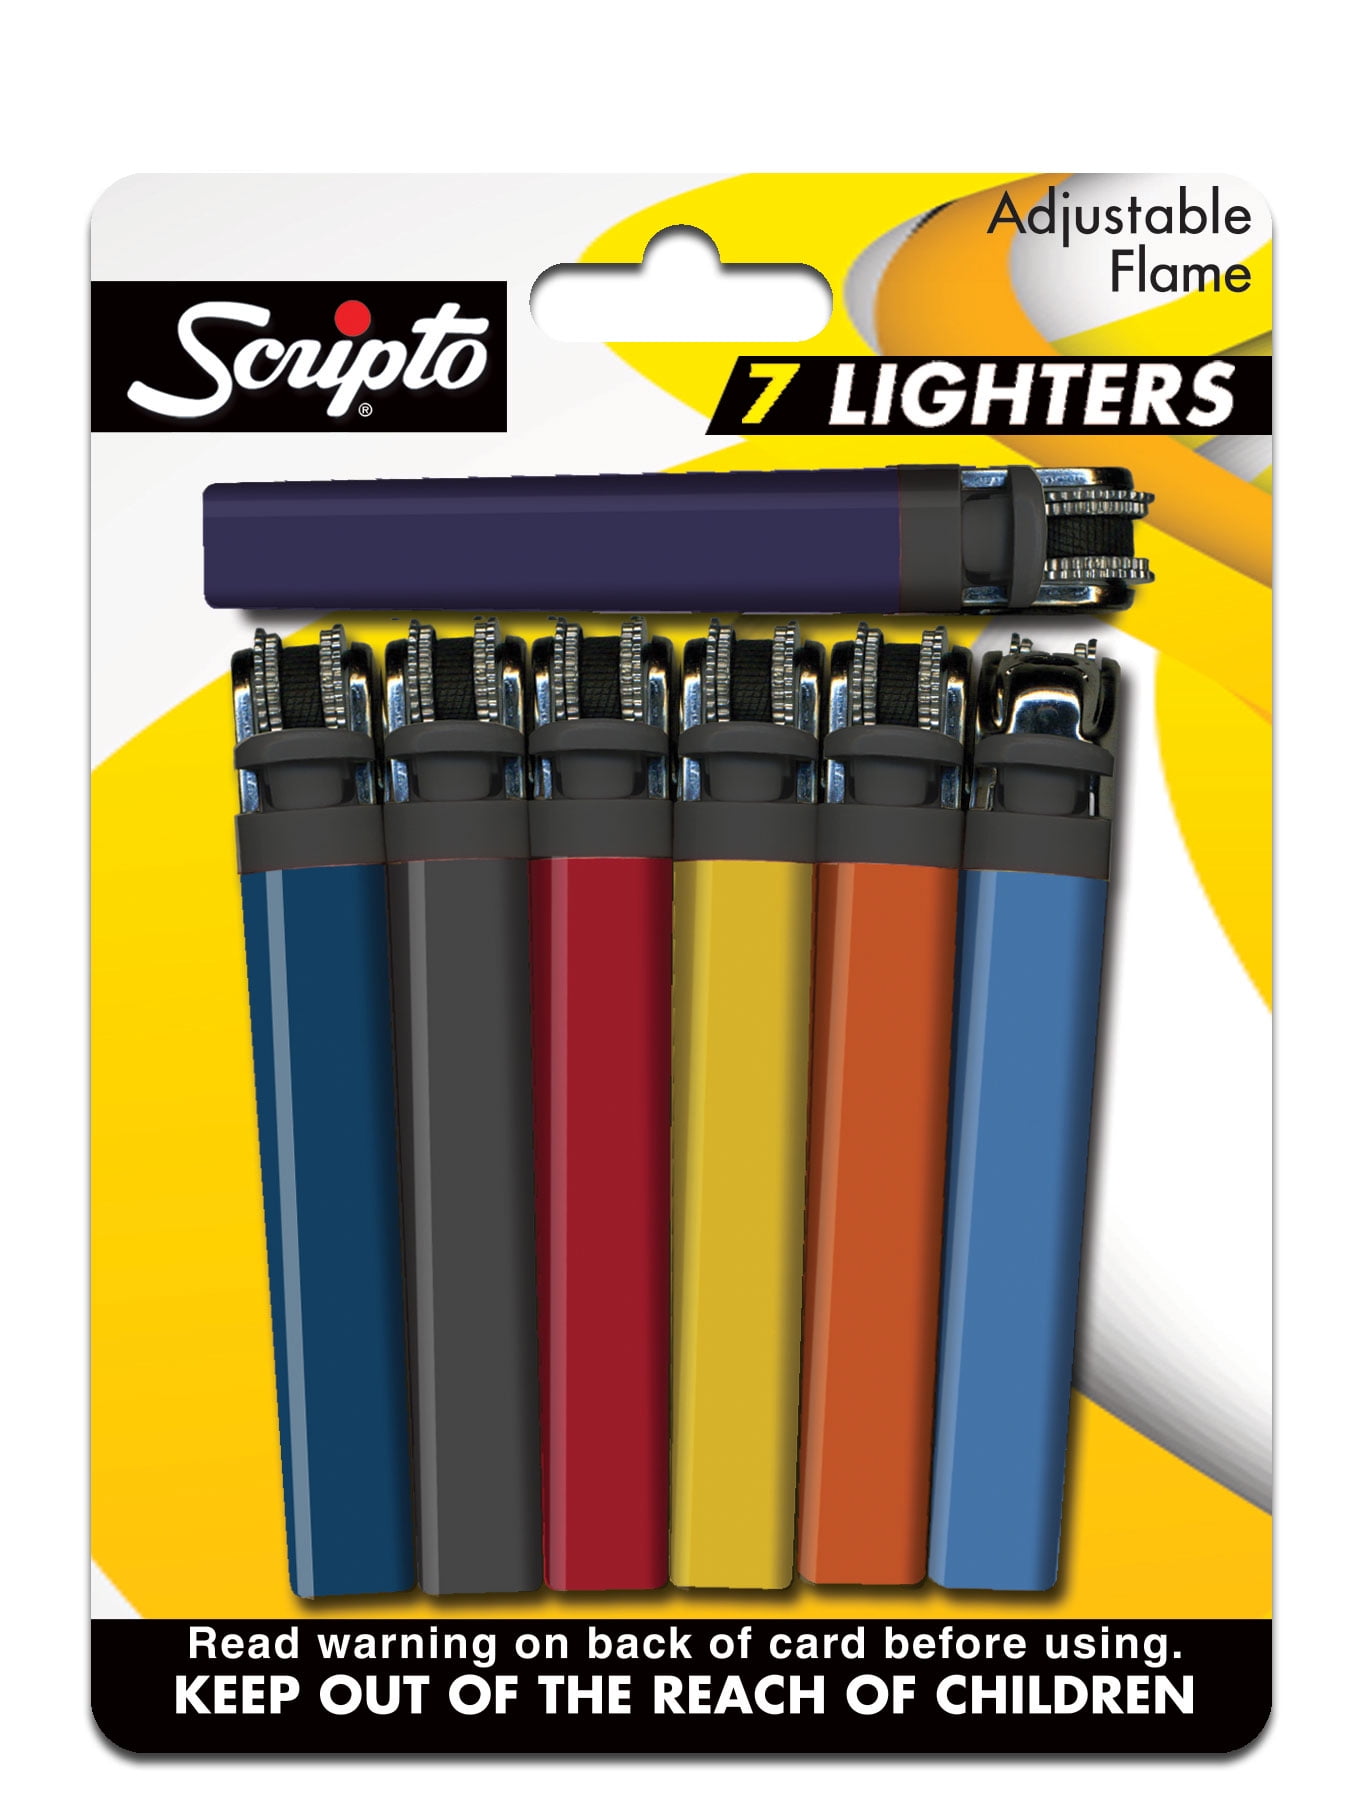 CHEAPEST NEW DISPOSABLE CHILD RESISTANT LIGHTERS  ADJUSTABLE FLAME  PACK OF 6/12 